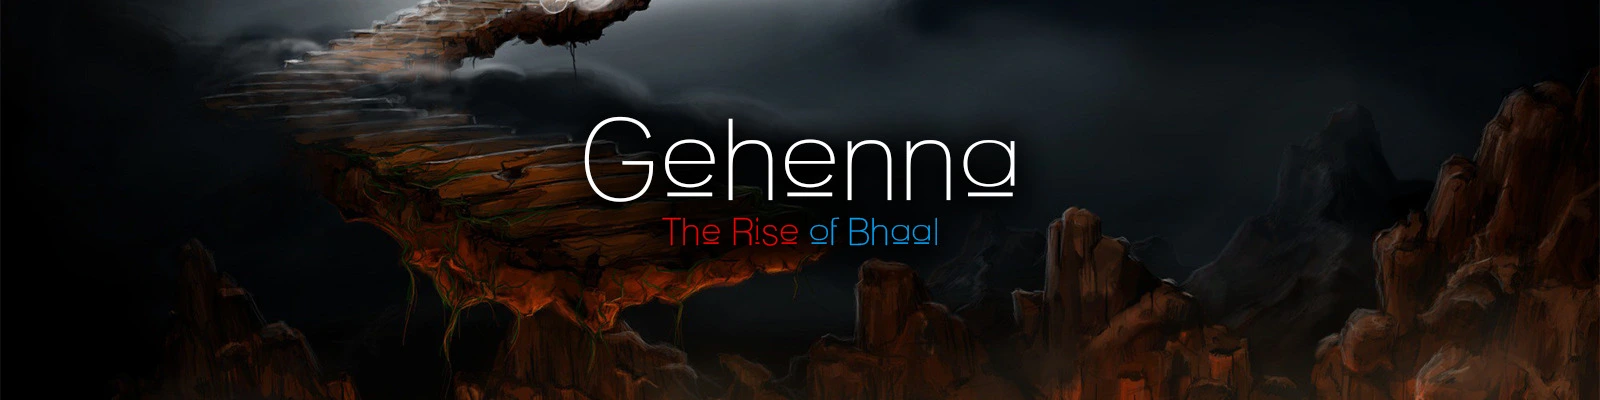 Gehenna: The Rise of Bhaal [v0.4.7] main image